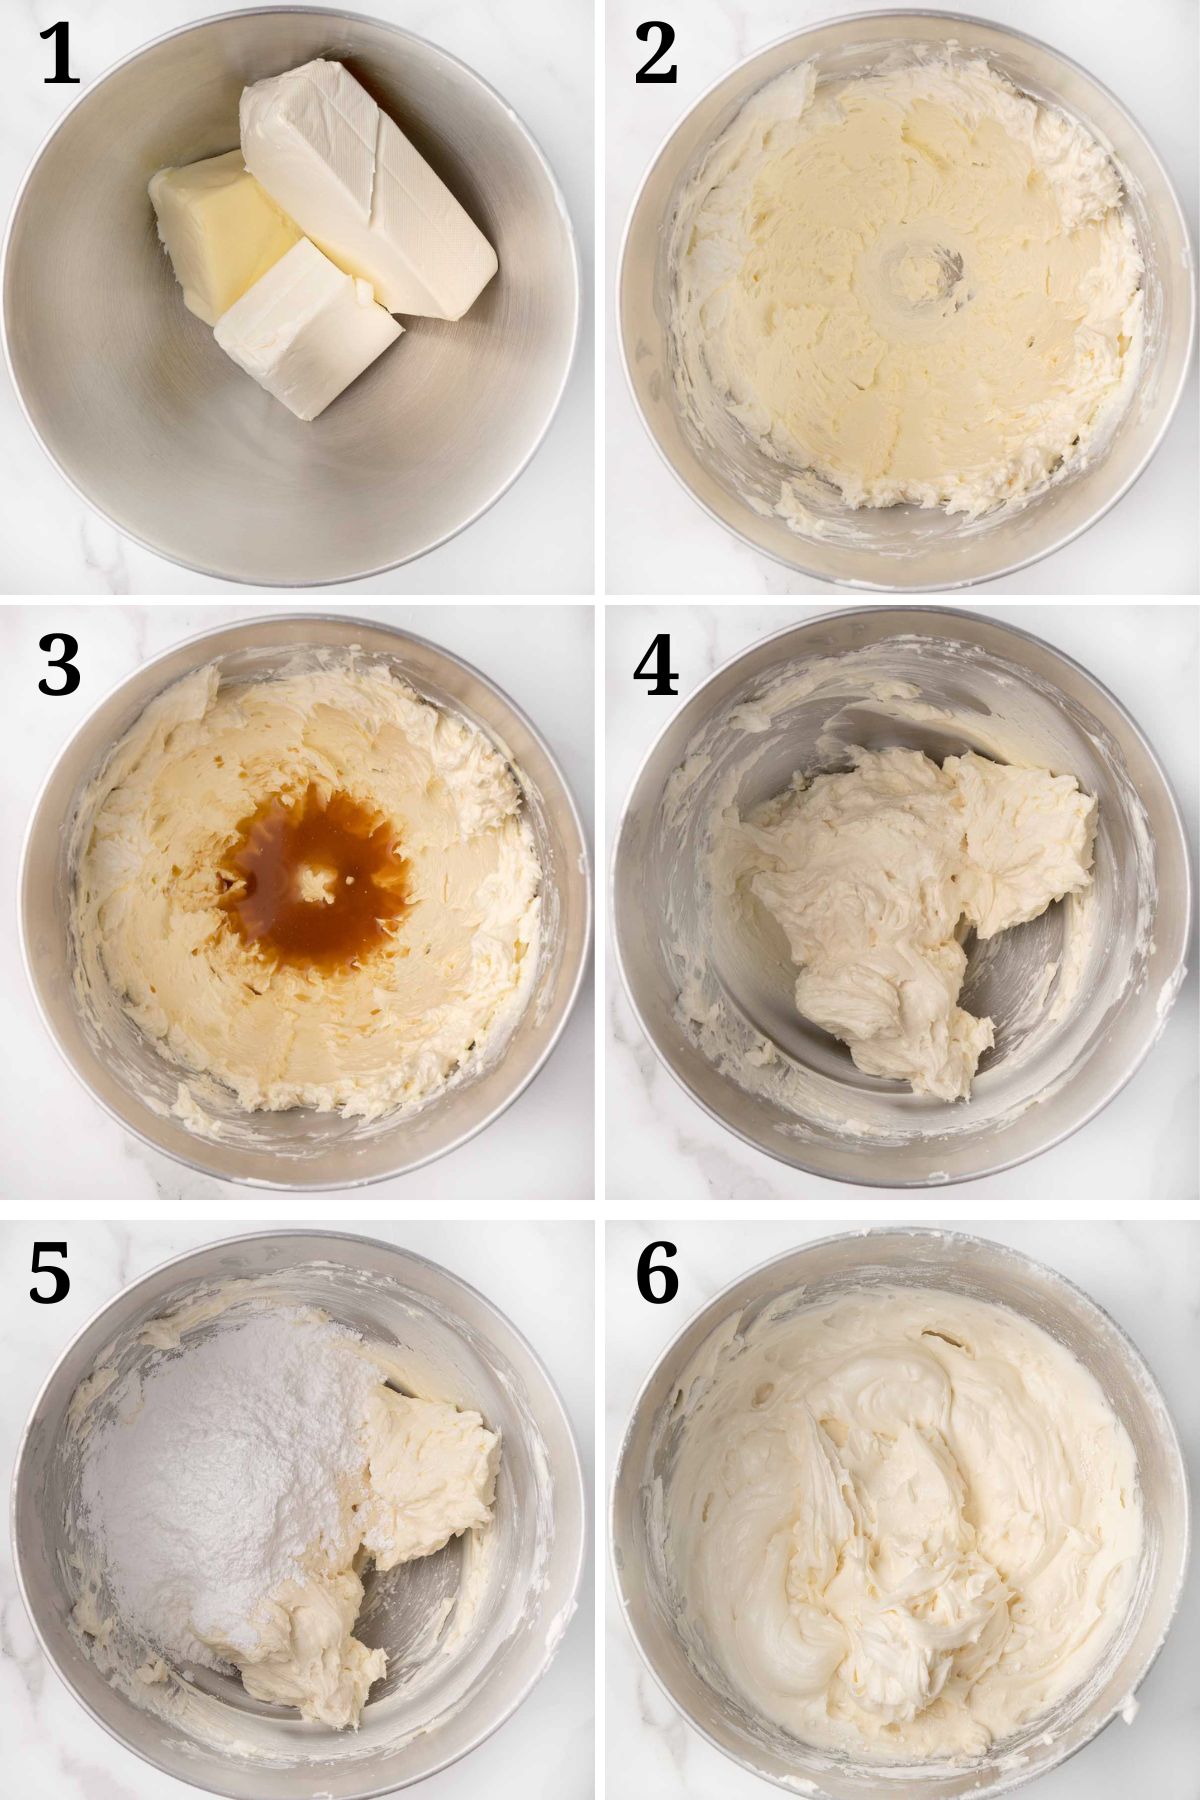 6 images showing how to make the cream cheese frosting